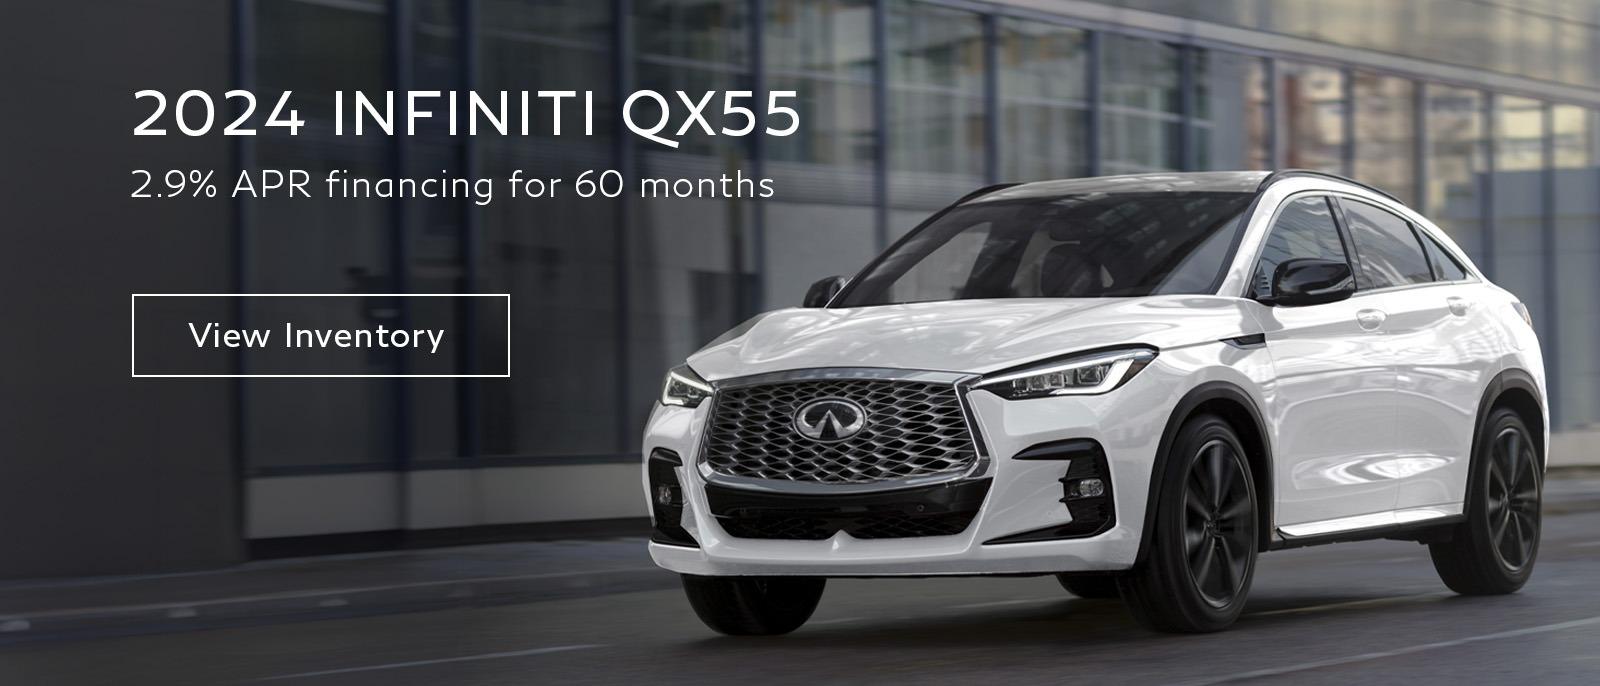 2.9% APR for 60 months on 2024 QX55